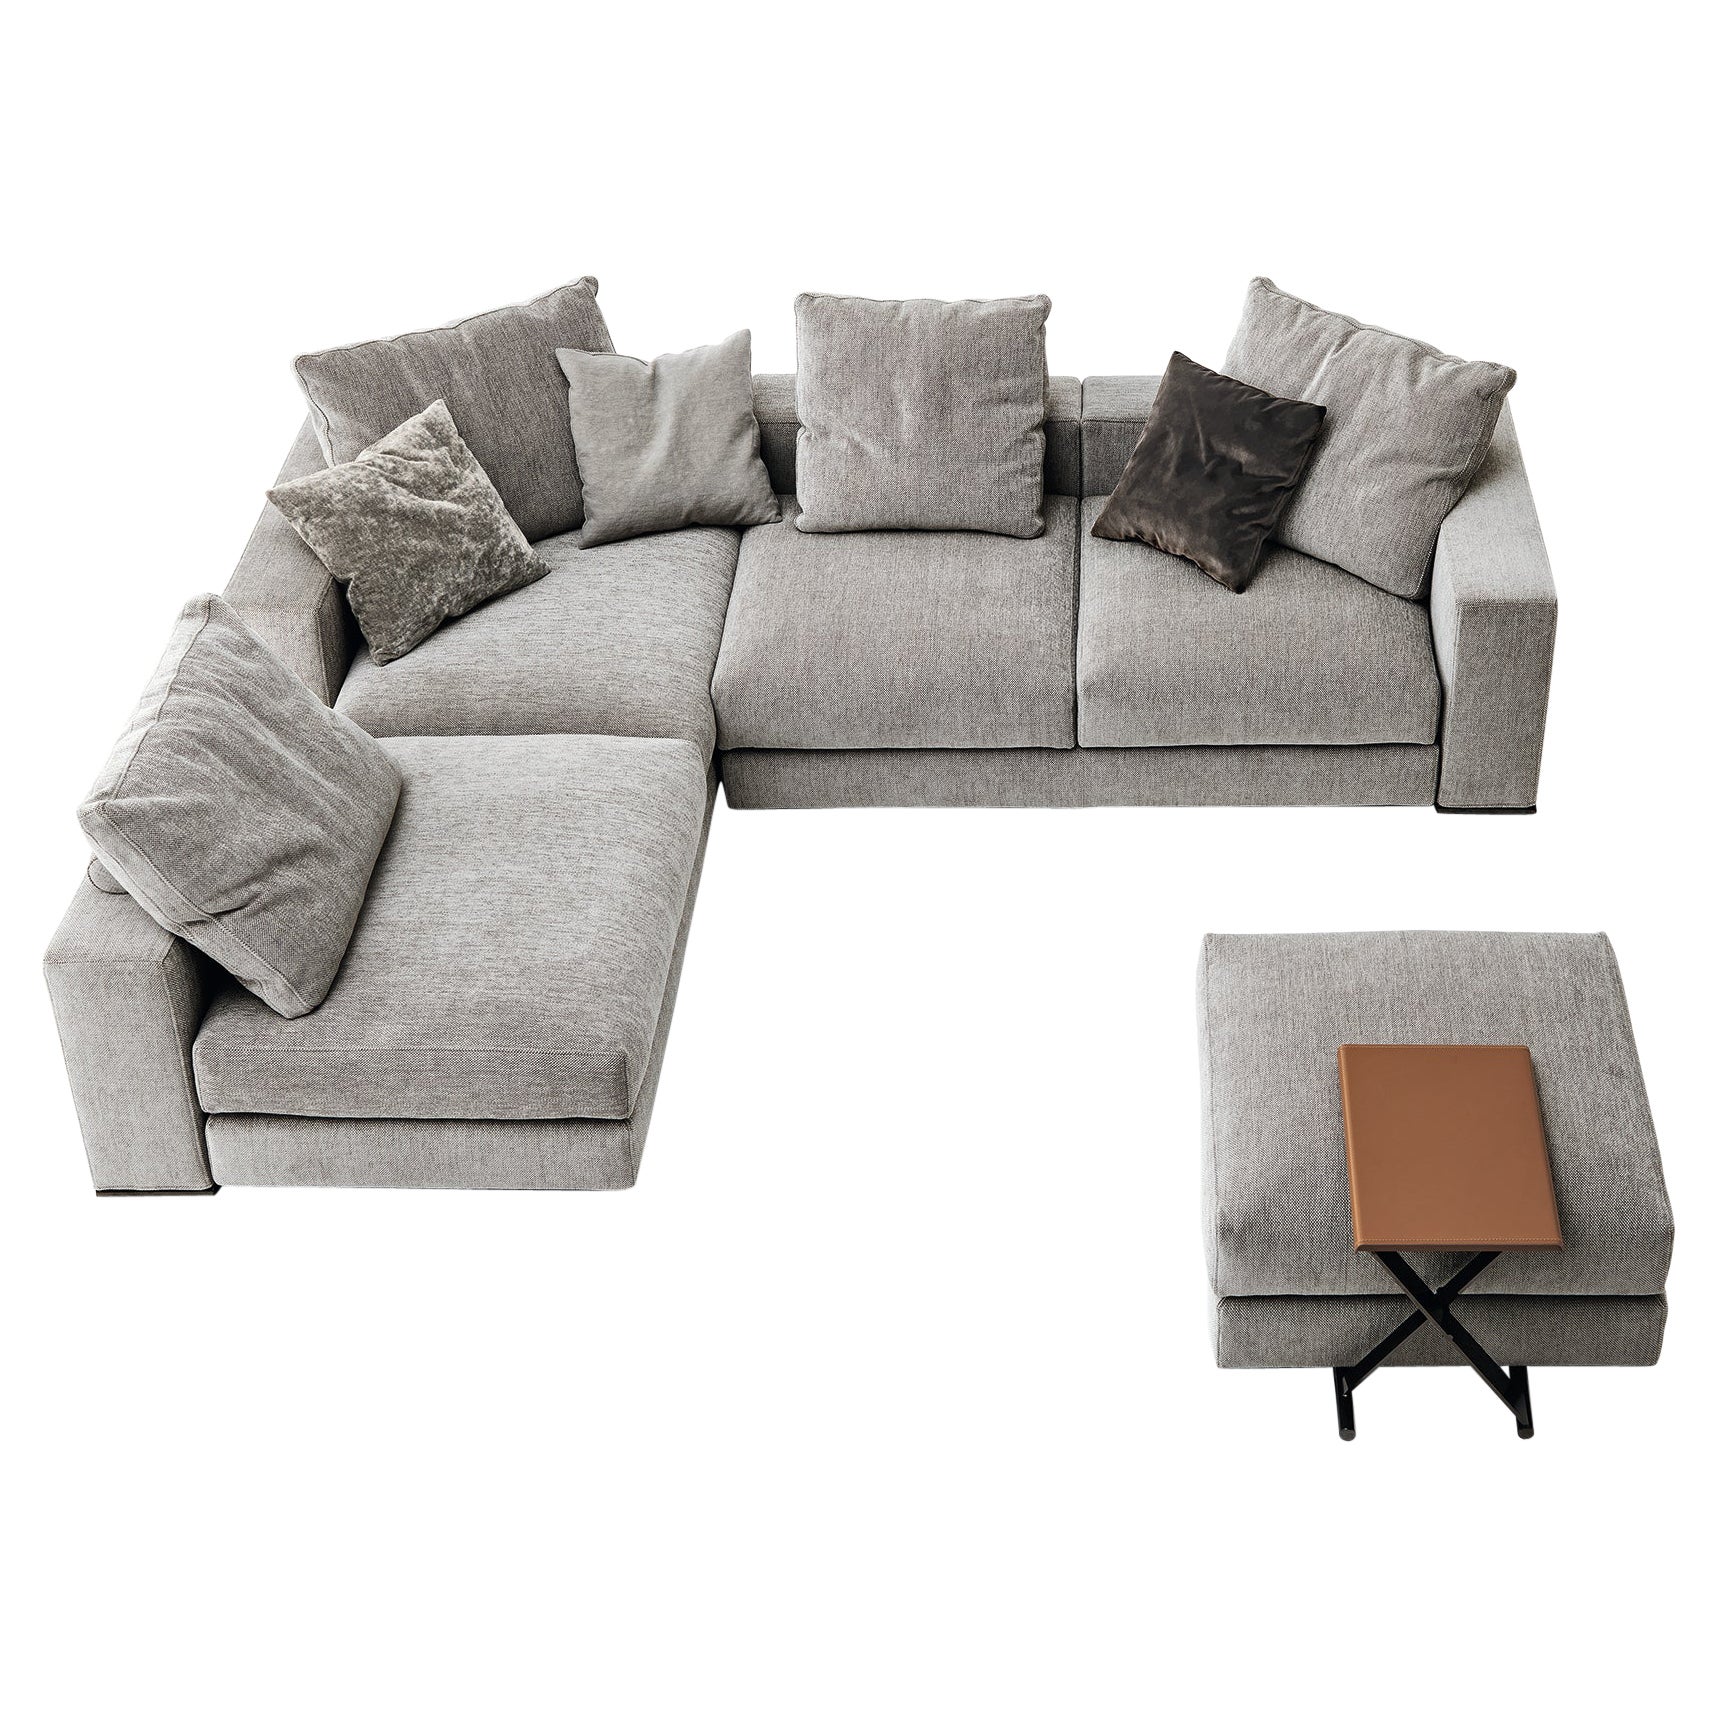 Ananta Class 23 Medium Sectional Sofa in Lusso Upholstery by Sergio Bicego For Sale